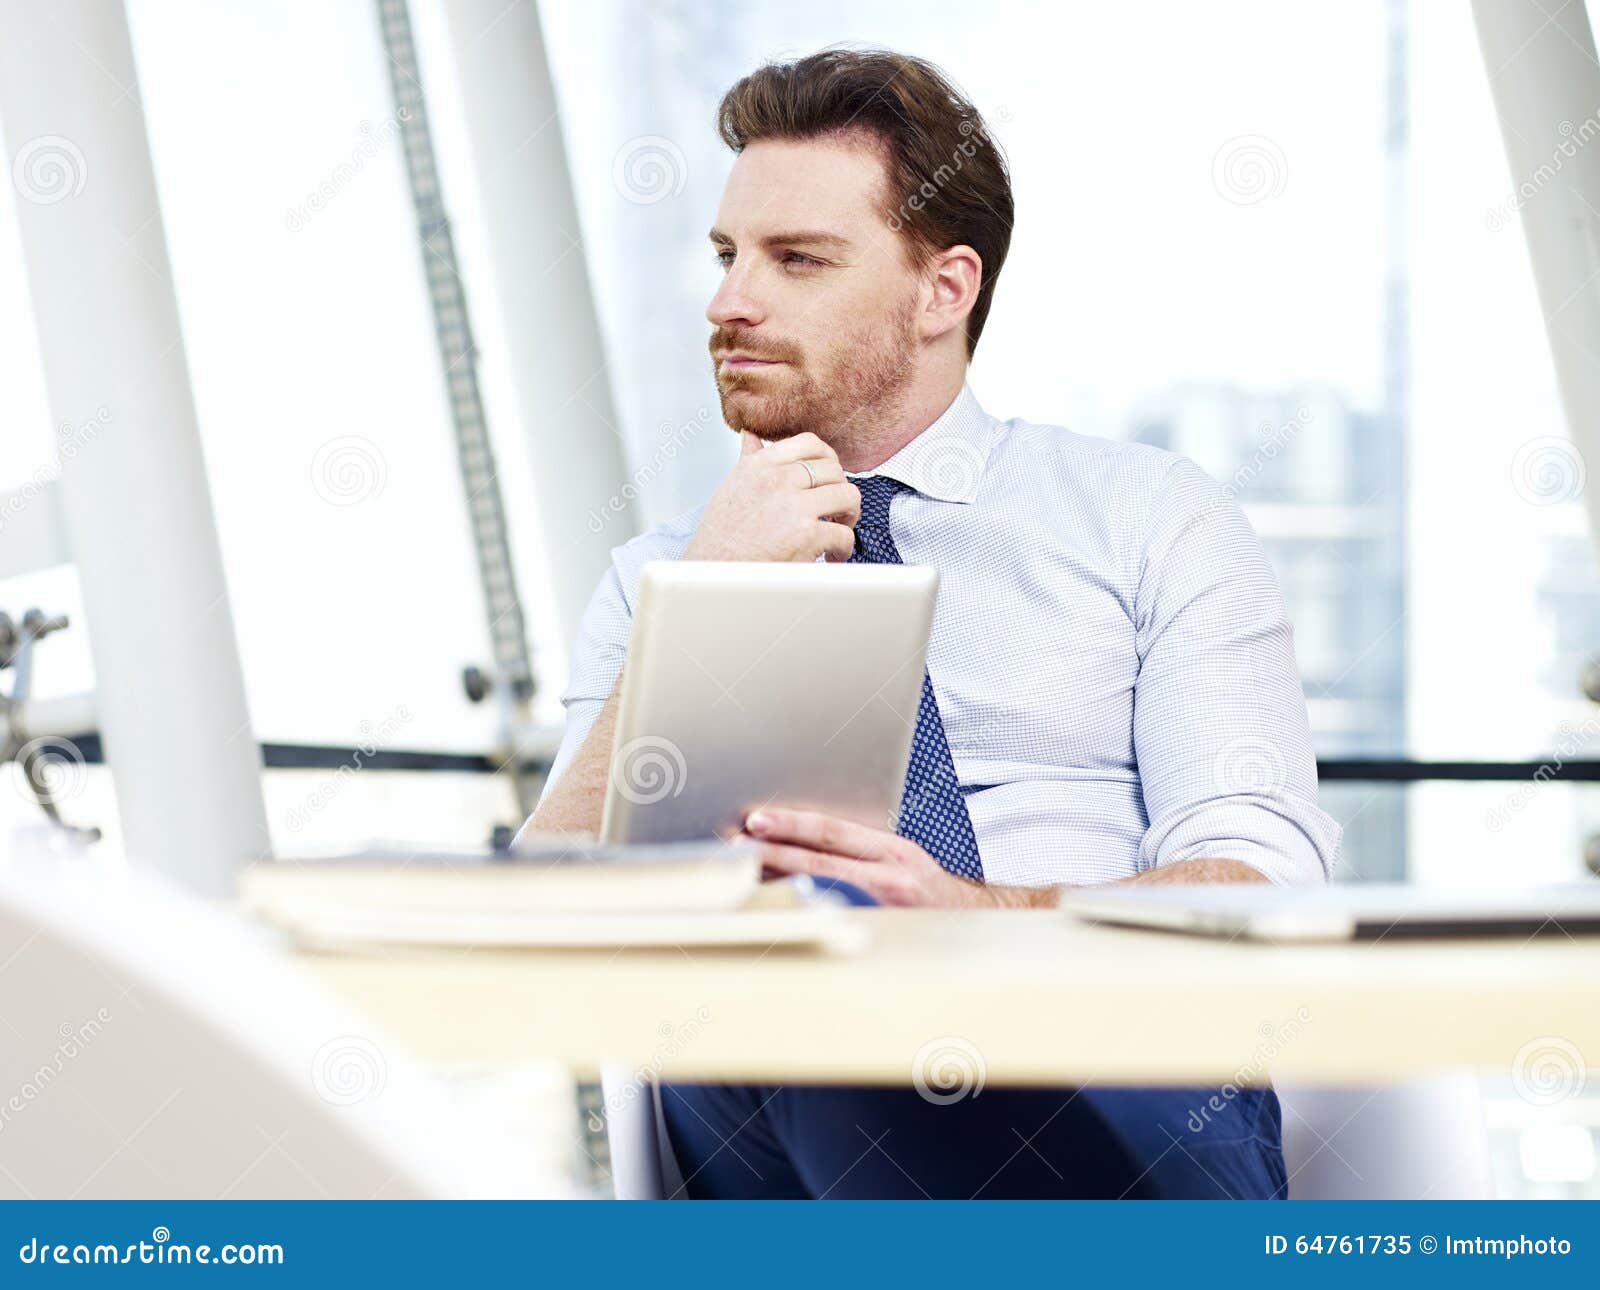 Business Person Thinking In Office Stock Photo - Image ...